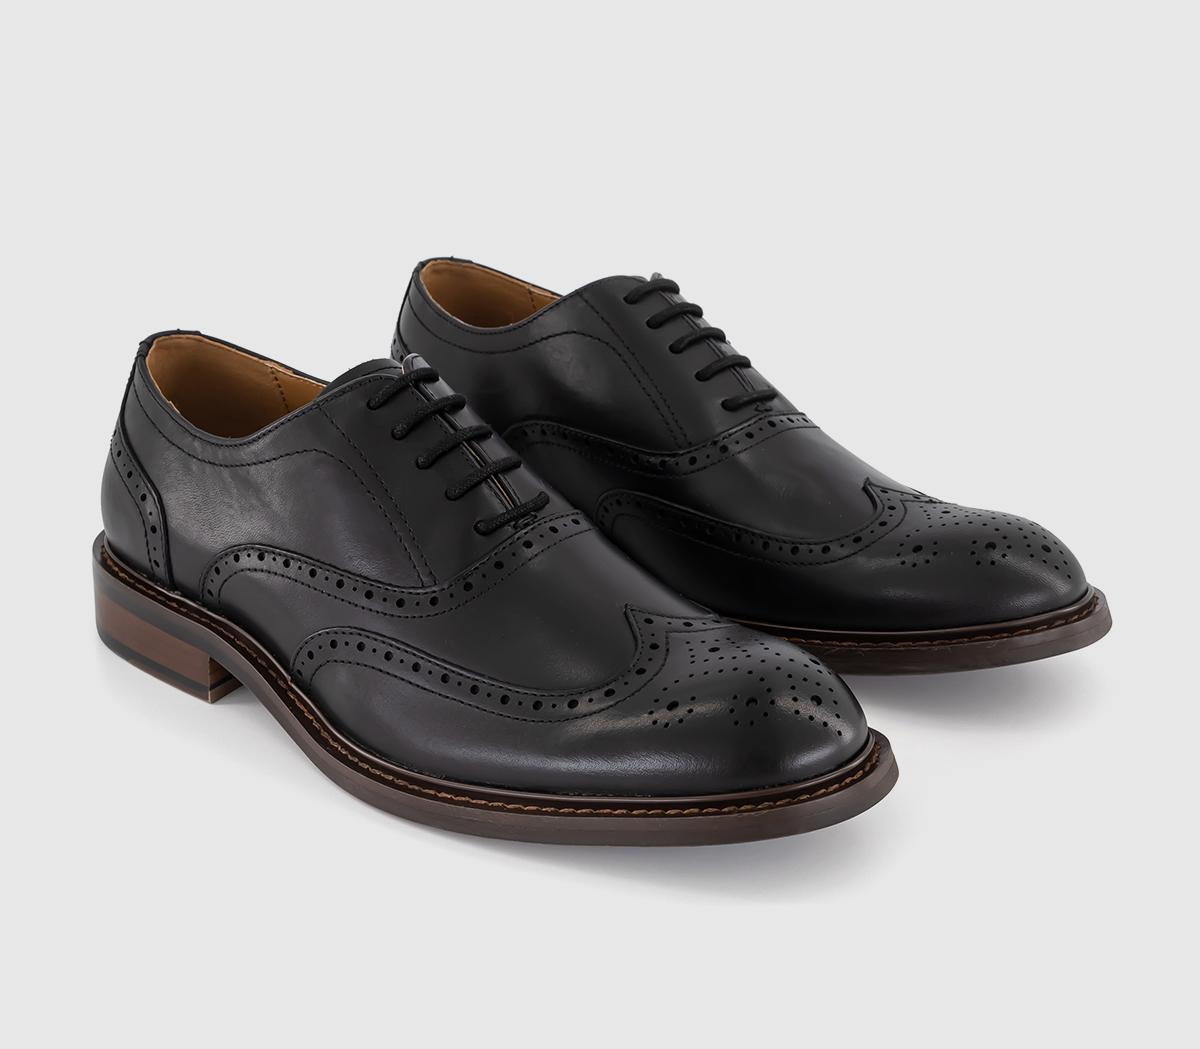 OFFICE Mens Maxwell Oxford Brogues Black Leather, 6